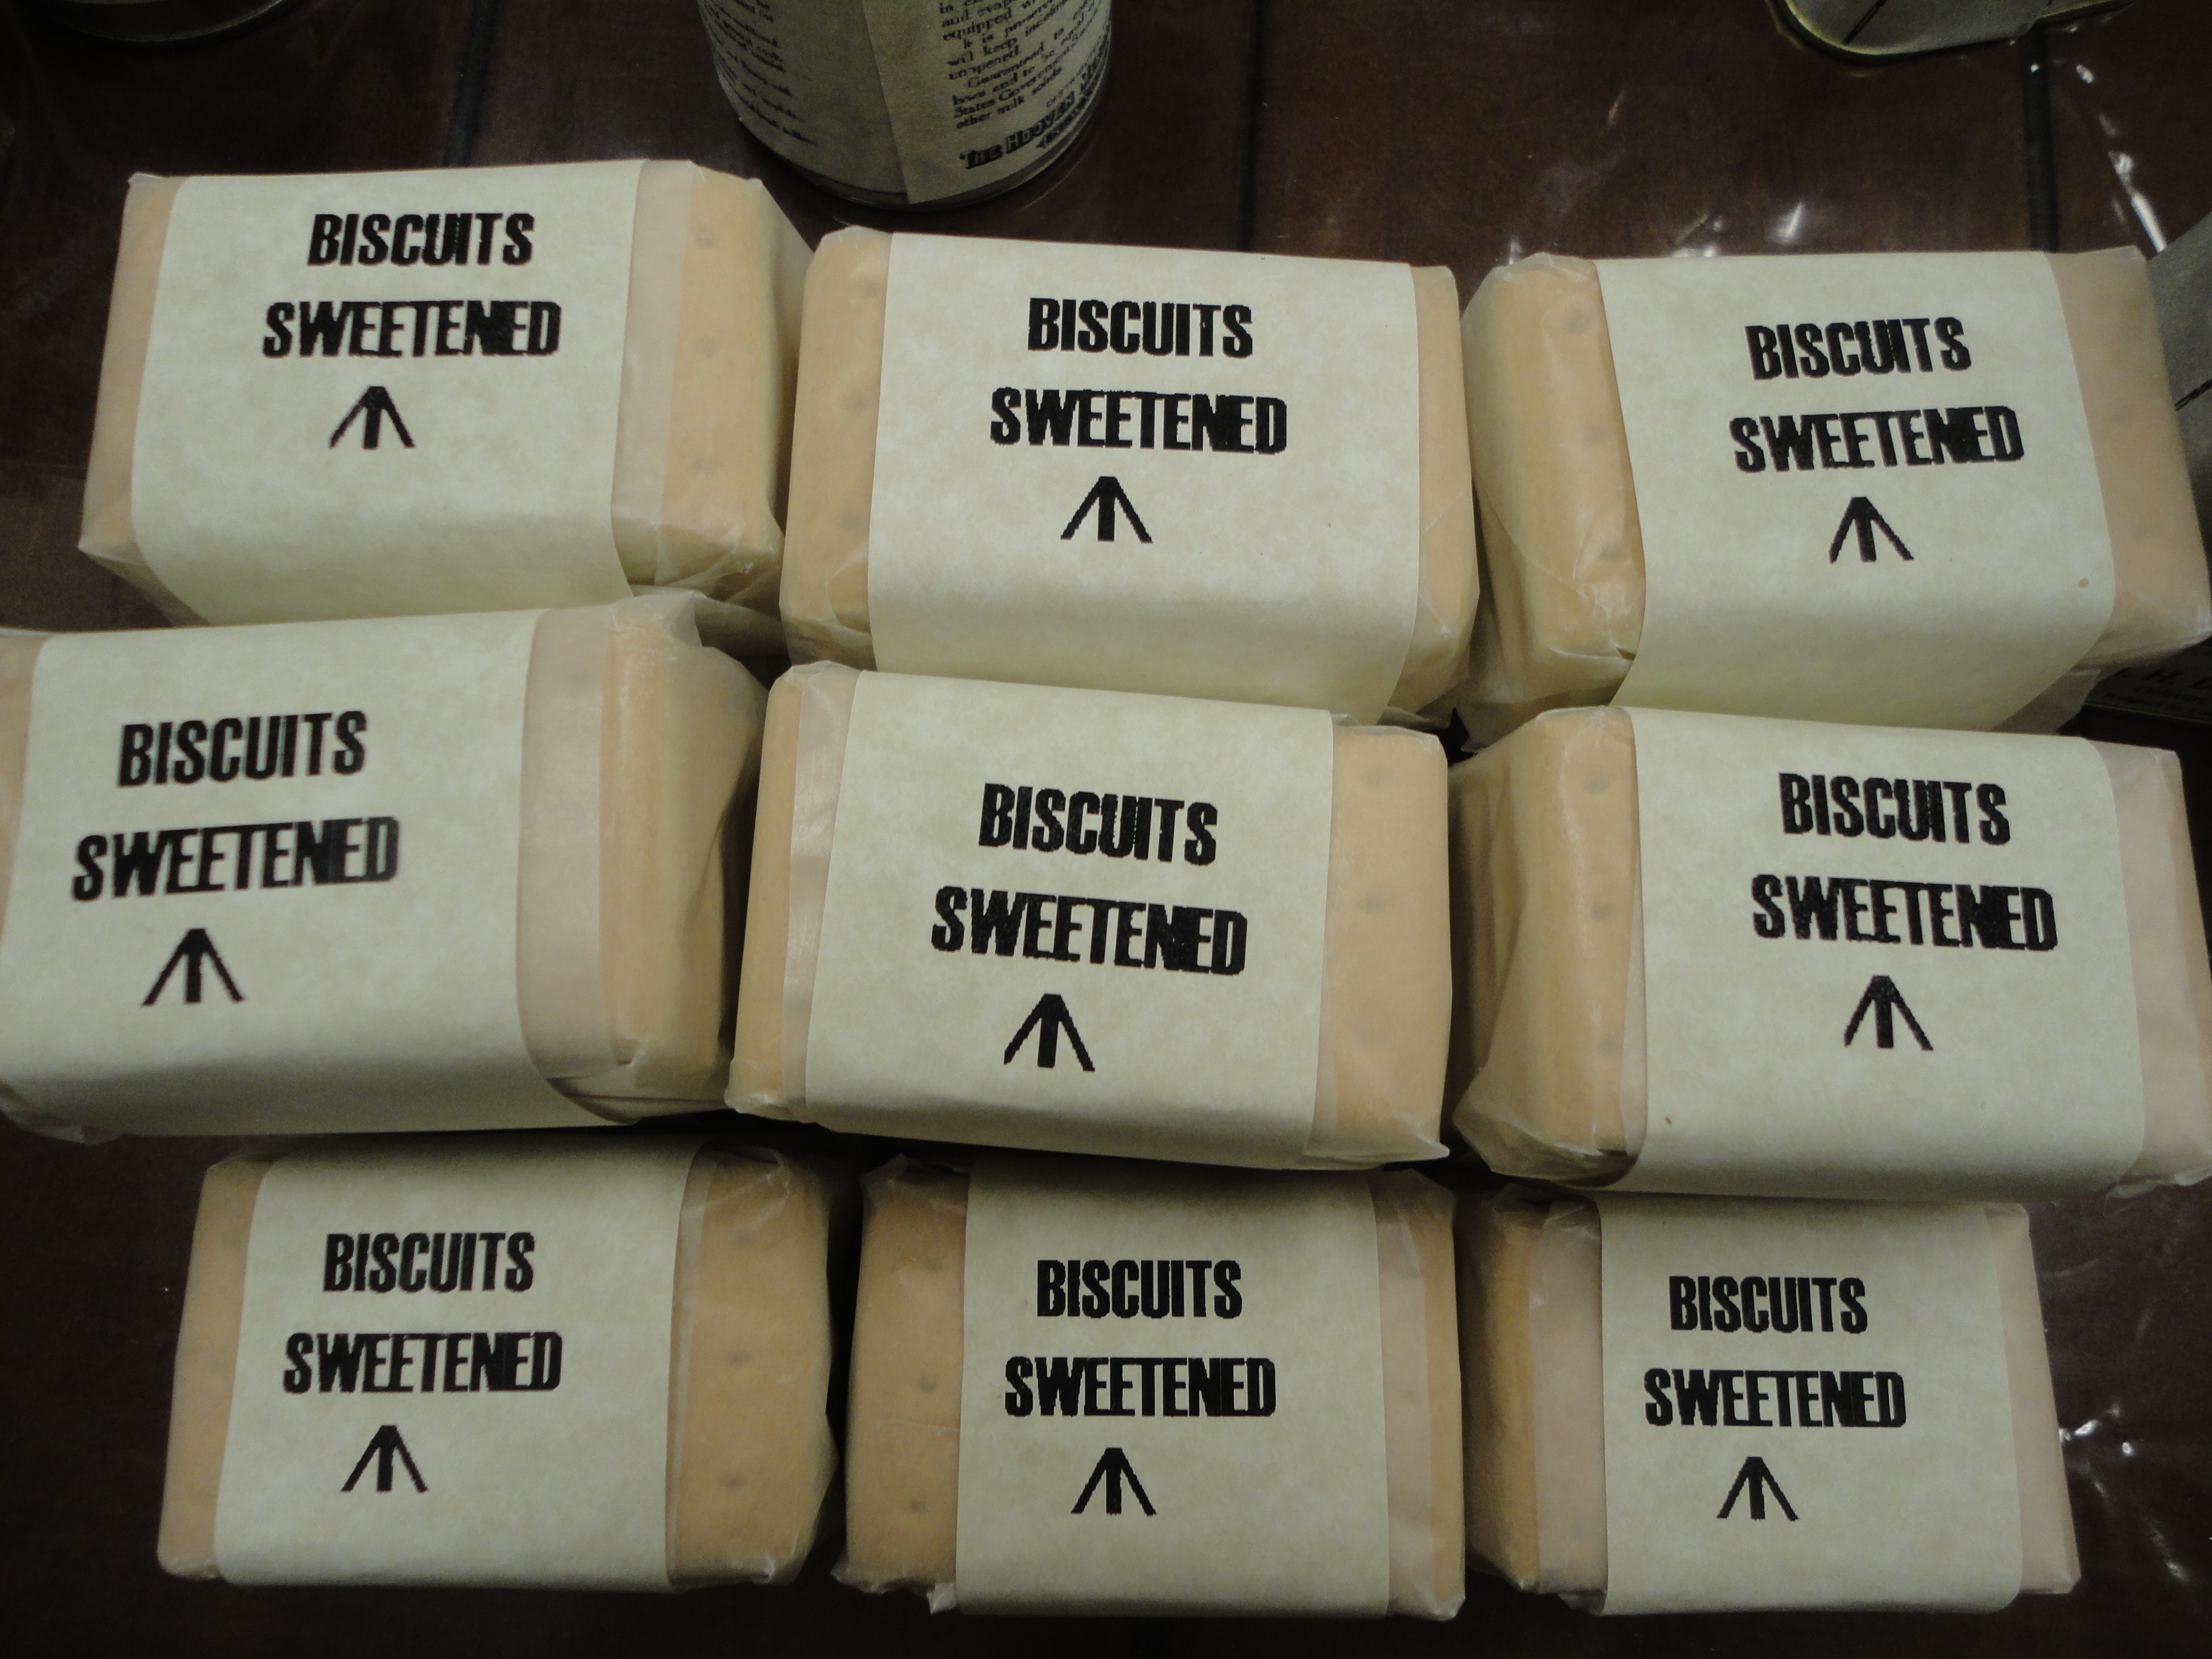 World War 1 Rations: Biscuits Sweetened